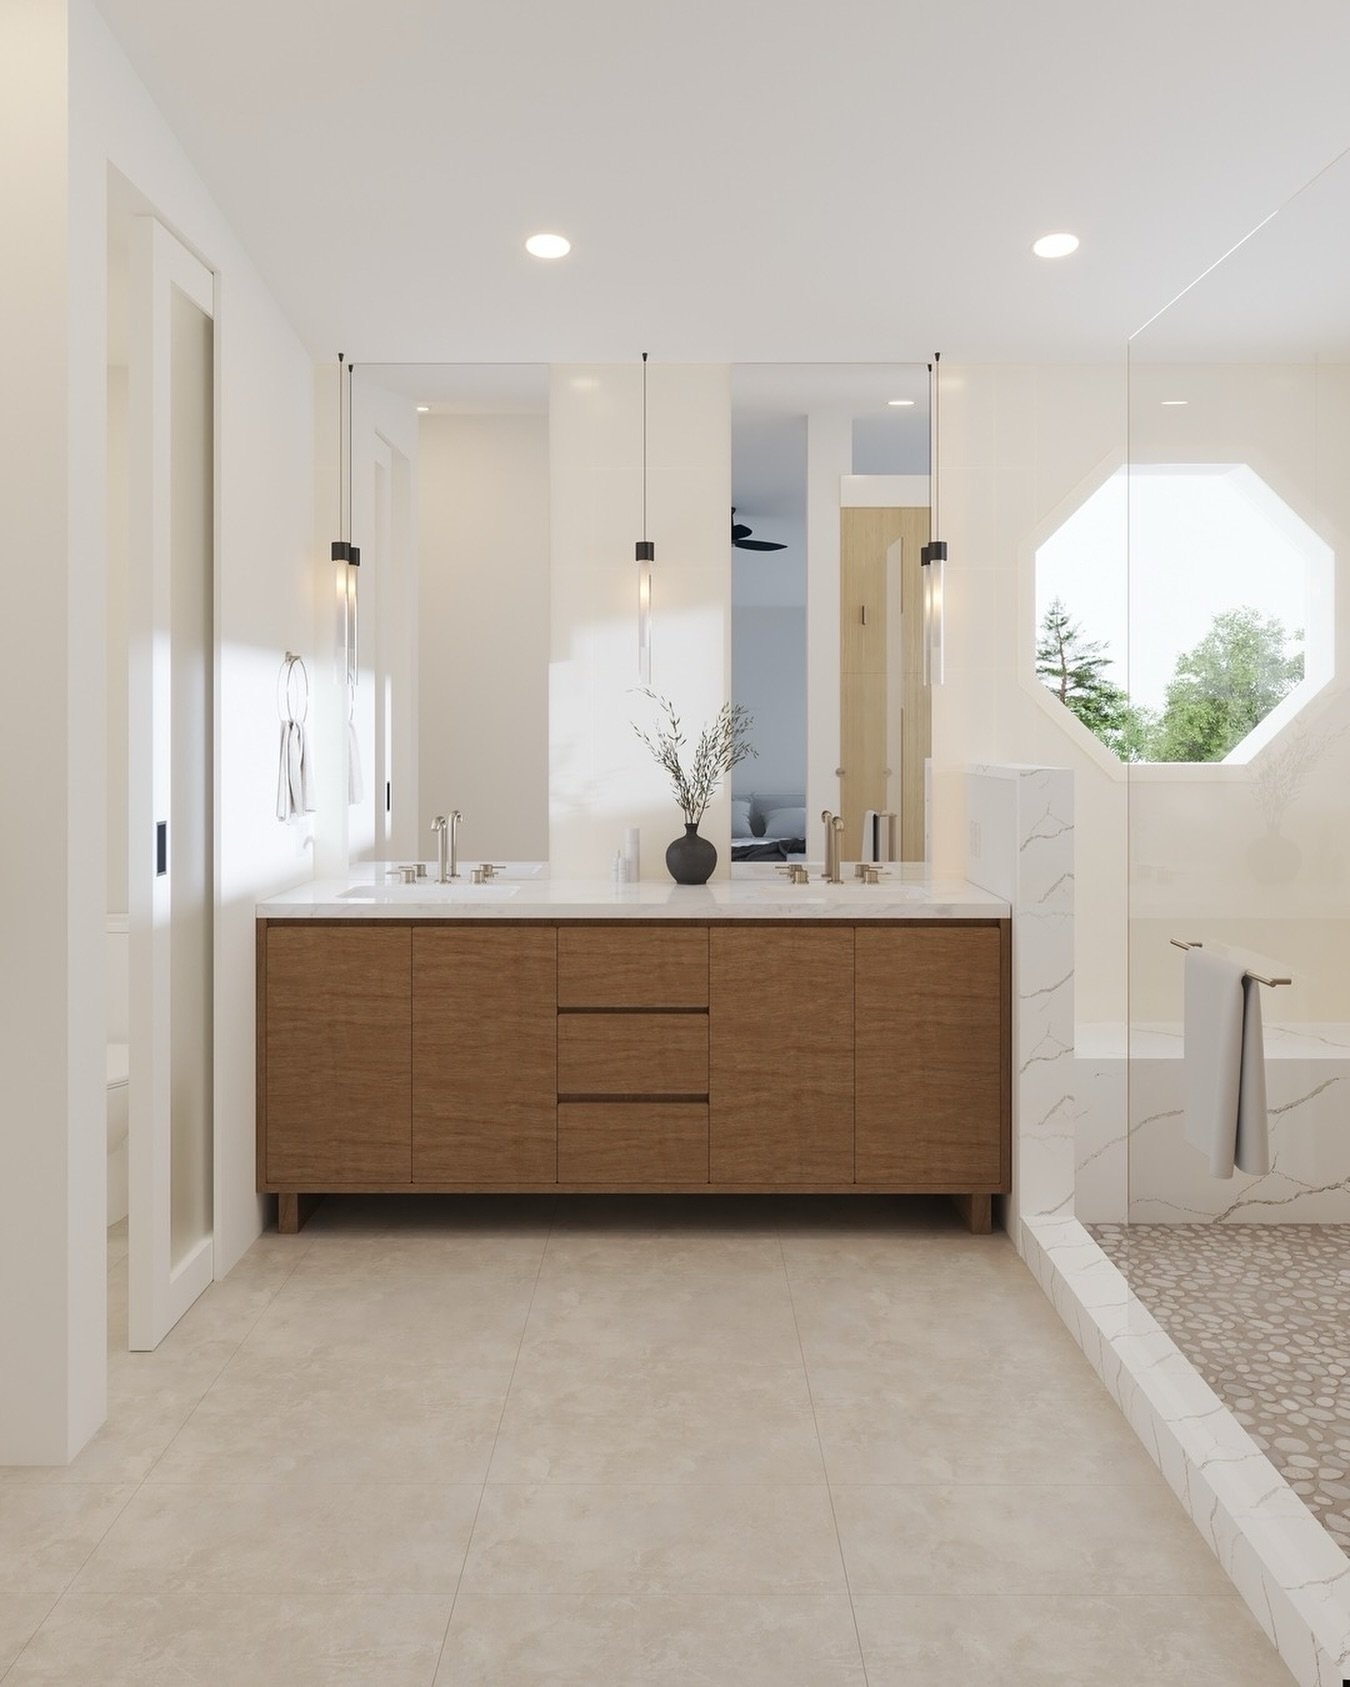 Sharing a sneak peek of our upcoming bathroom remodel project. #sagebrushhouse

▶ Our clients had a vision of blending the old with the new, preserving the original window while transforming the space into a luxurious oasis. 
▶ Stay tuned as we creat